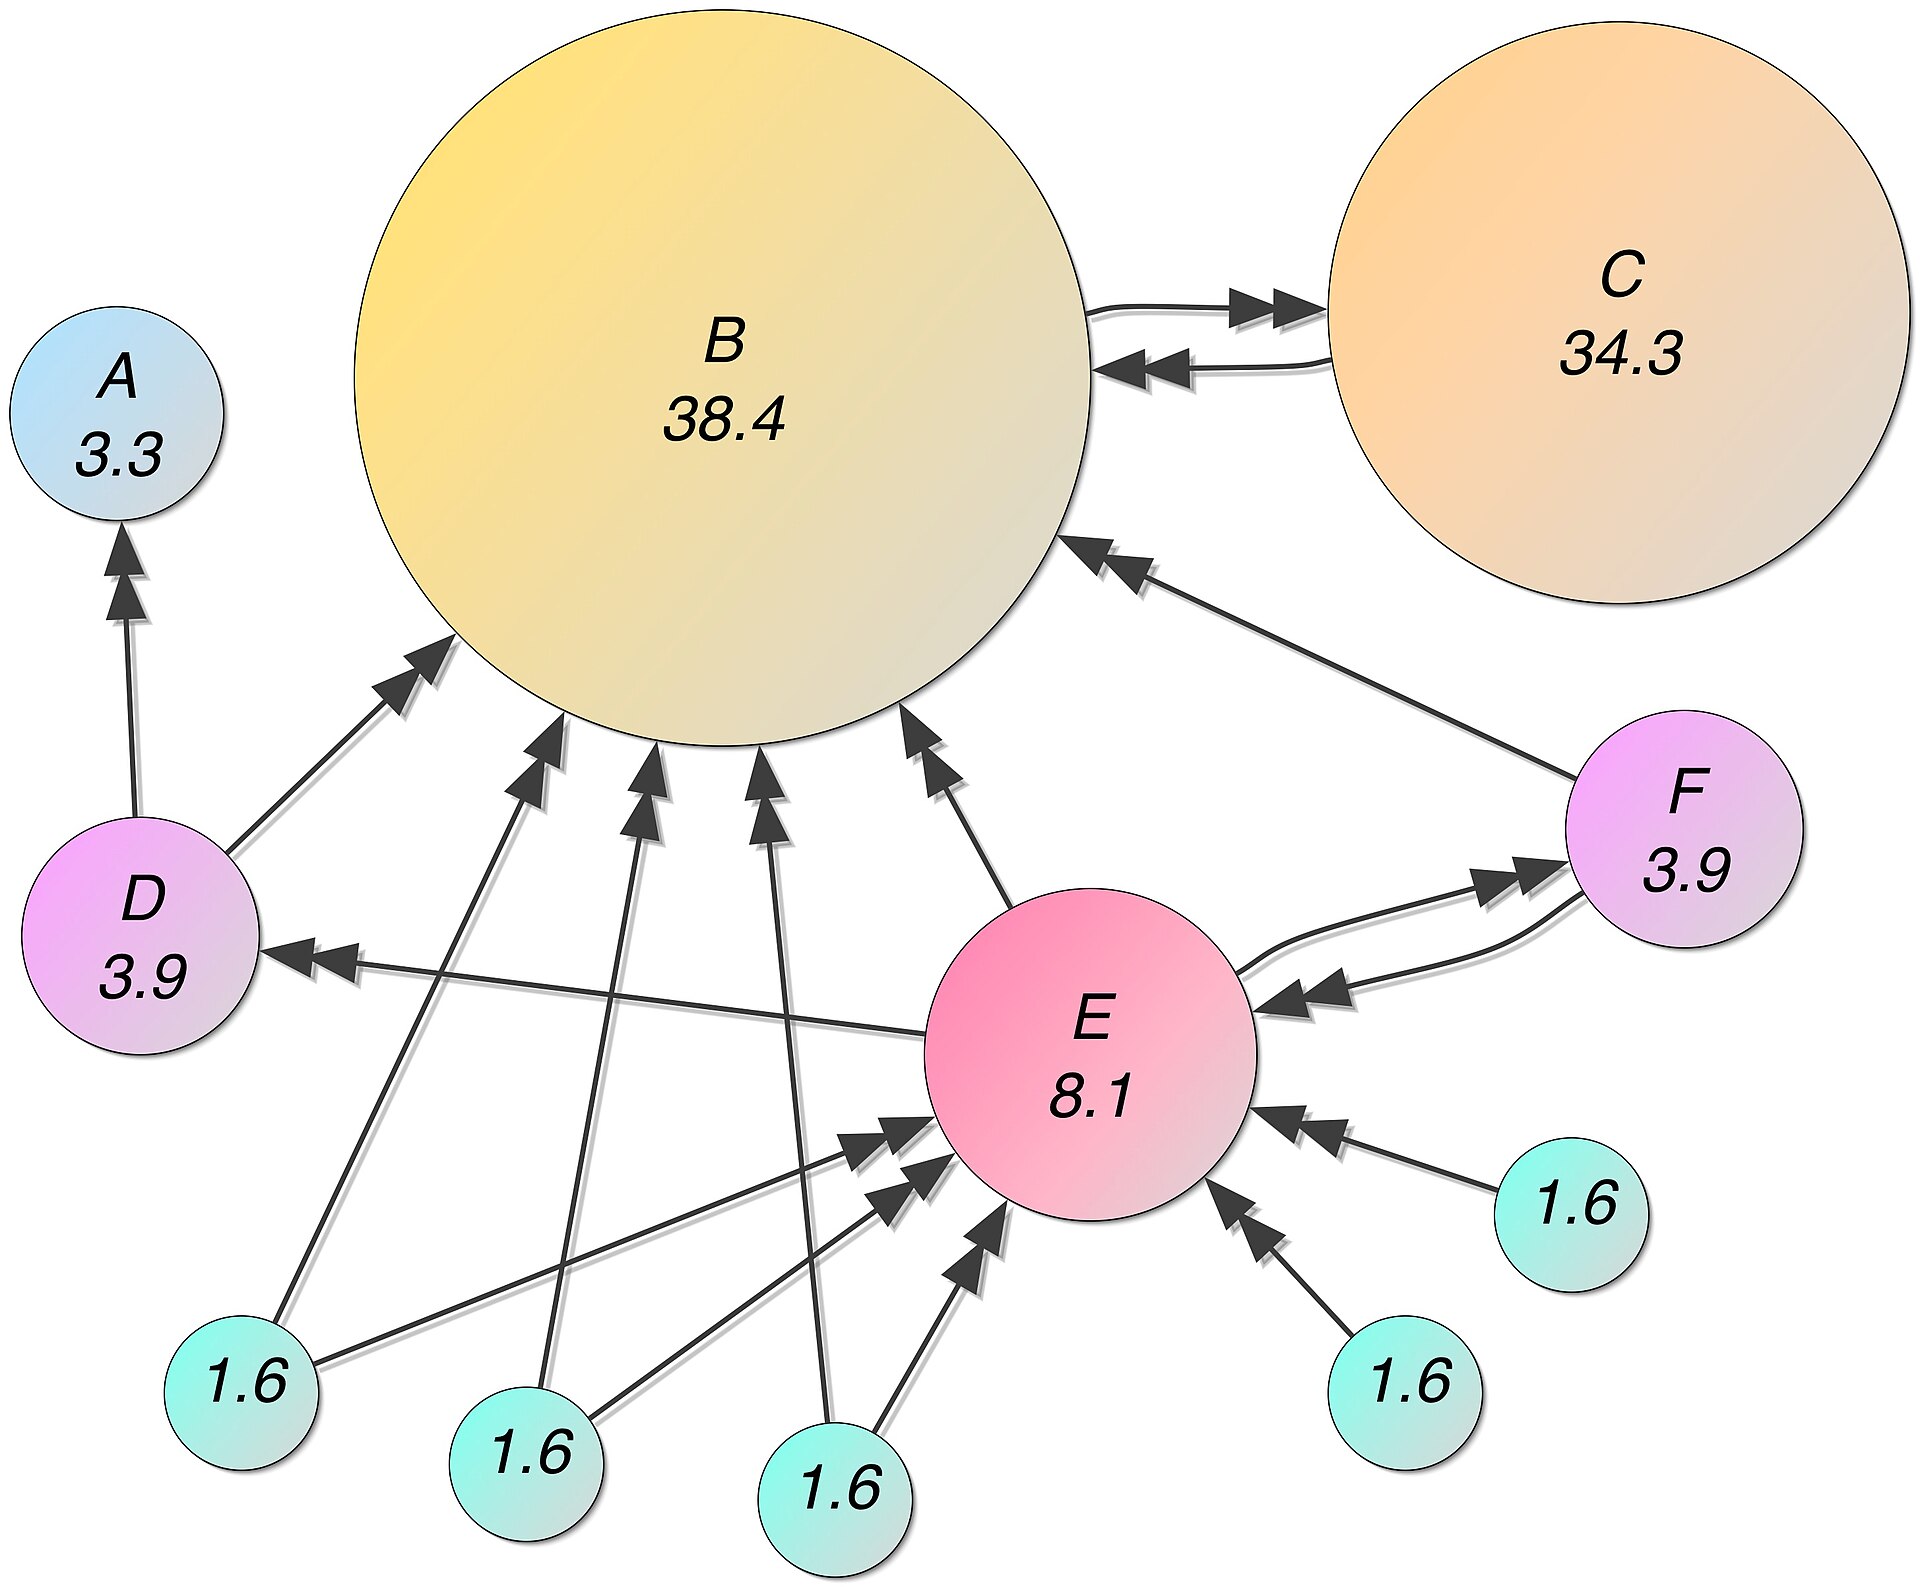 A set of 11 circles, with arrows between them. Some of the circles are larger than others, reflecting their high PageRank score. Large circles tend to be linked to other large circles by arrows.